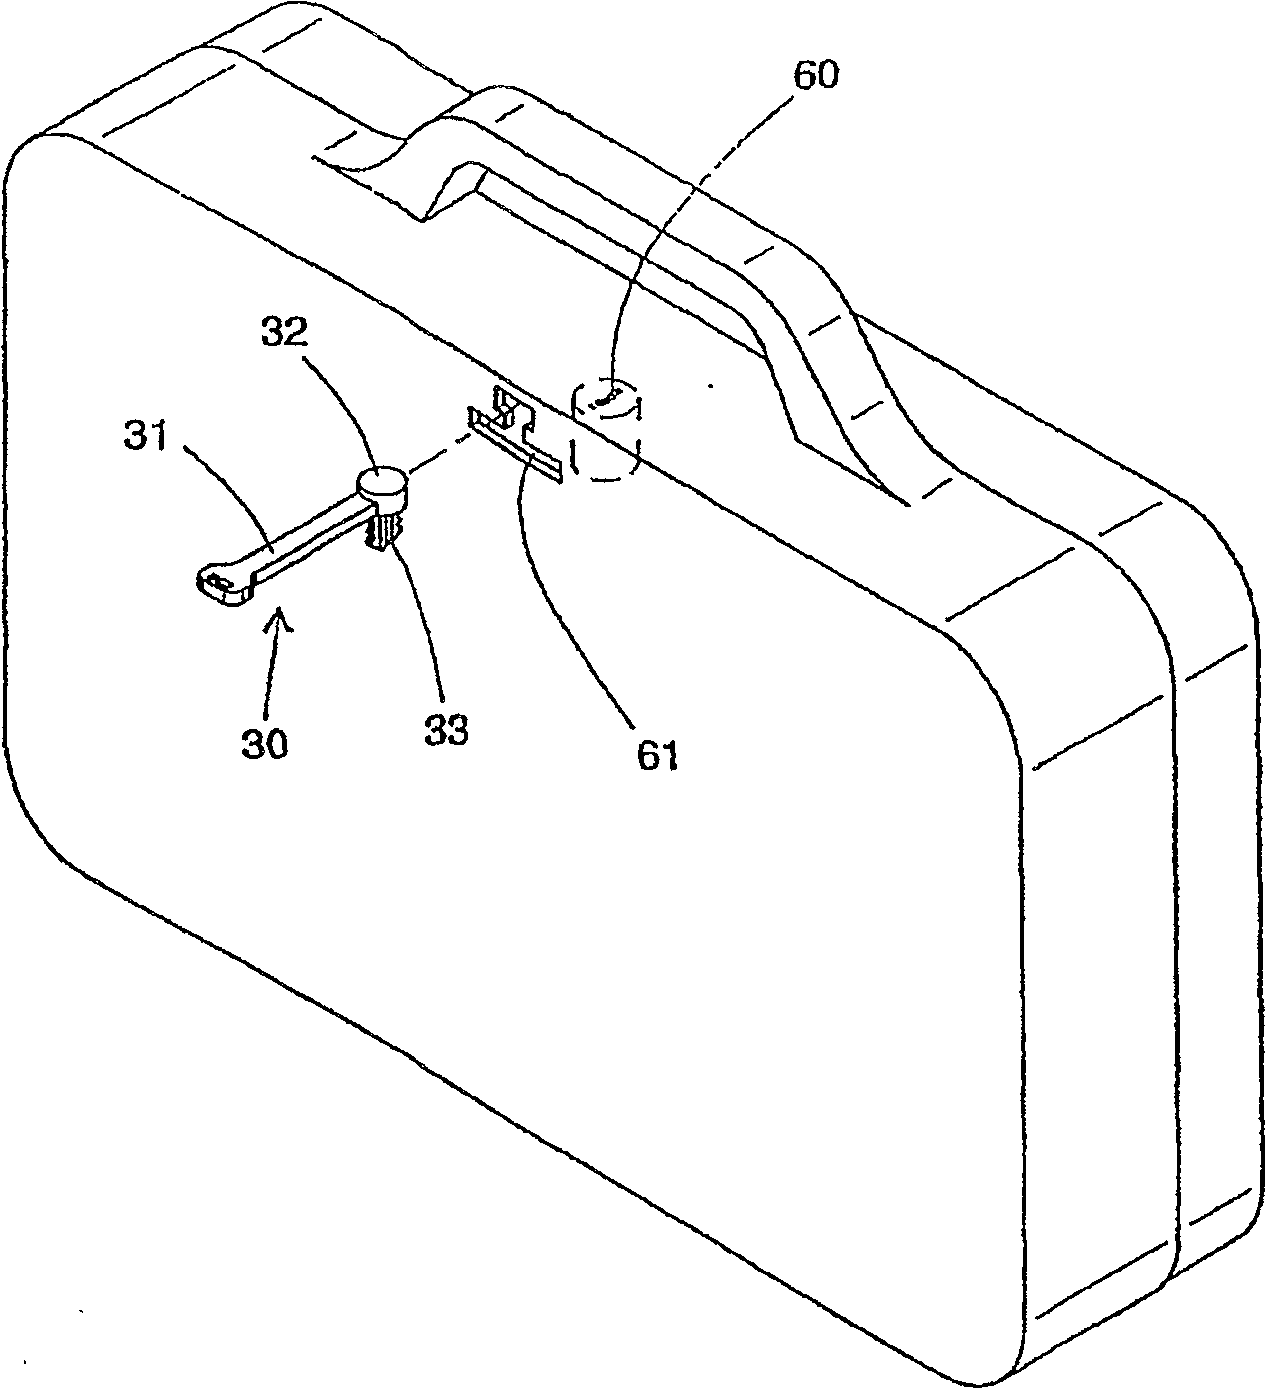 Lock body structure capable of stopping lock core twisted